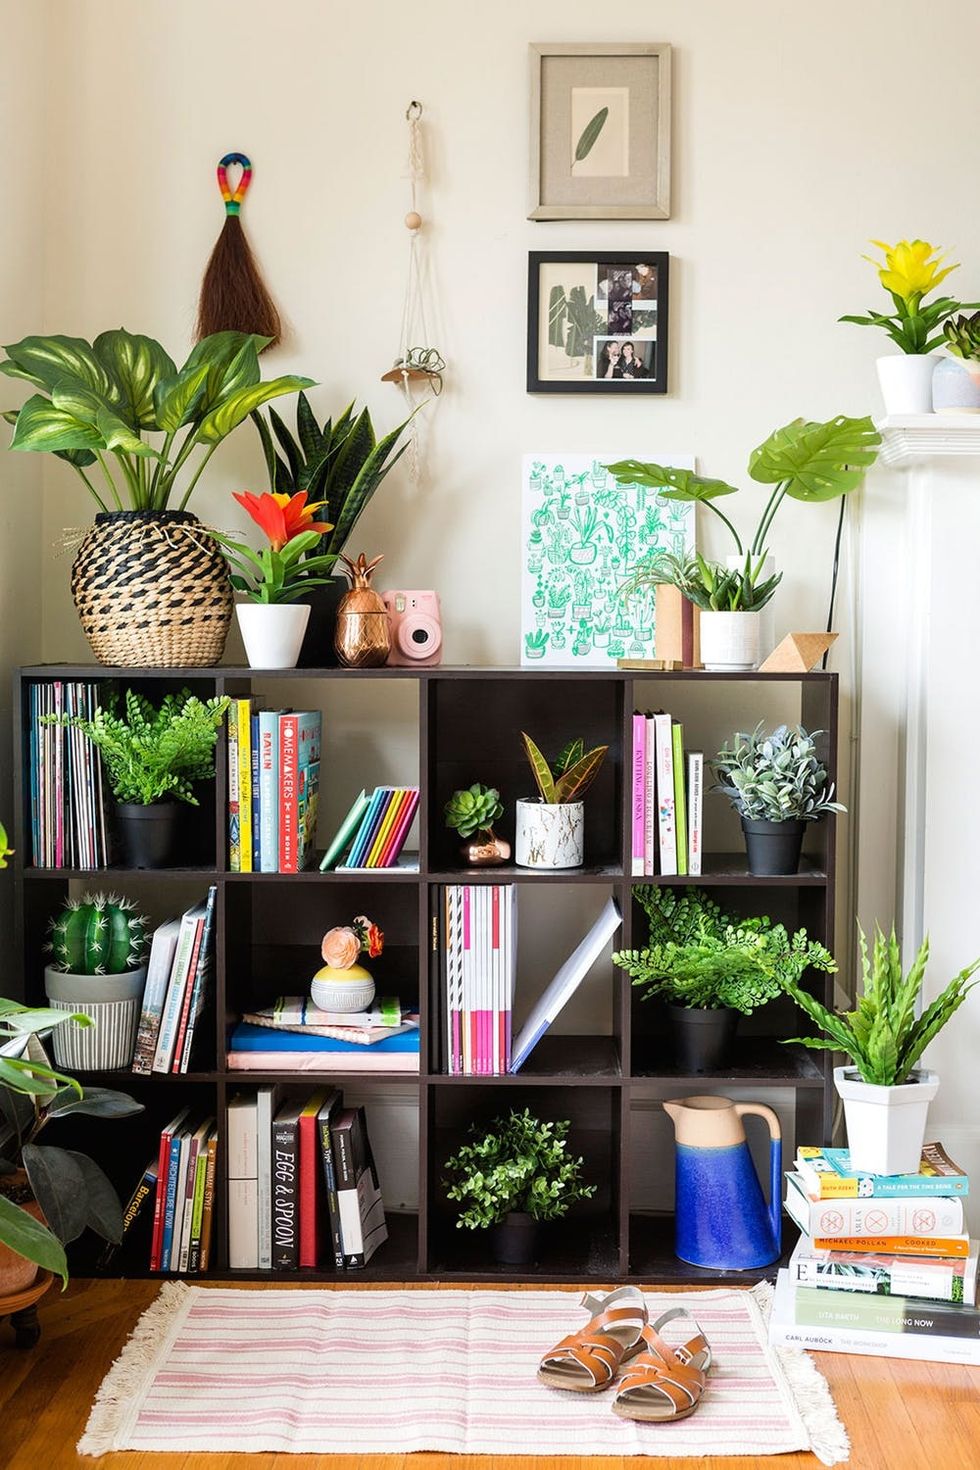 Pick These Artificial Plants for Fauxliage That Doesn’t Look So Faux ...